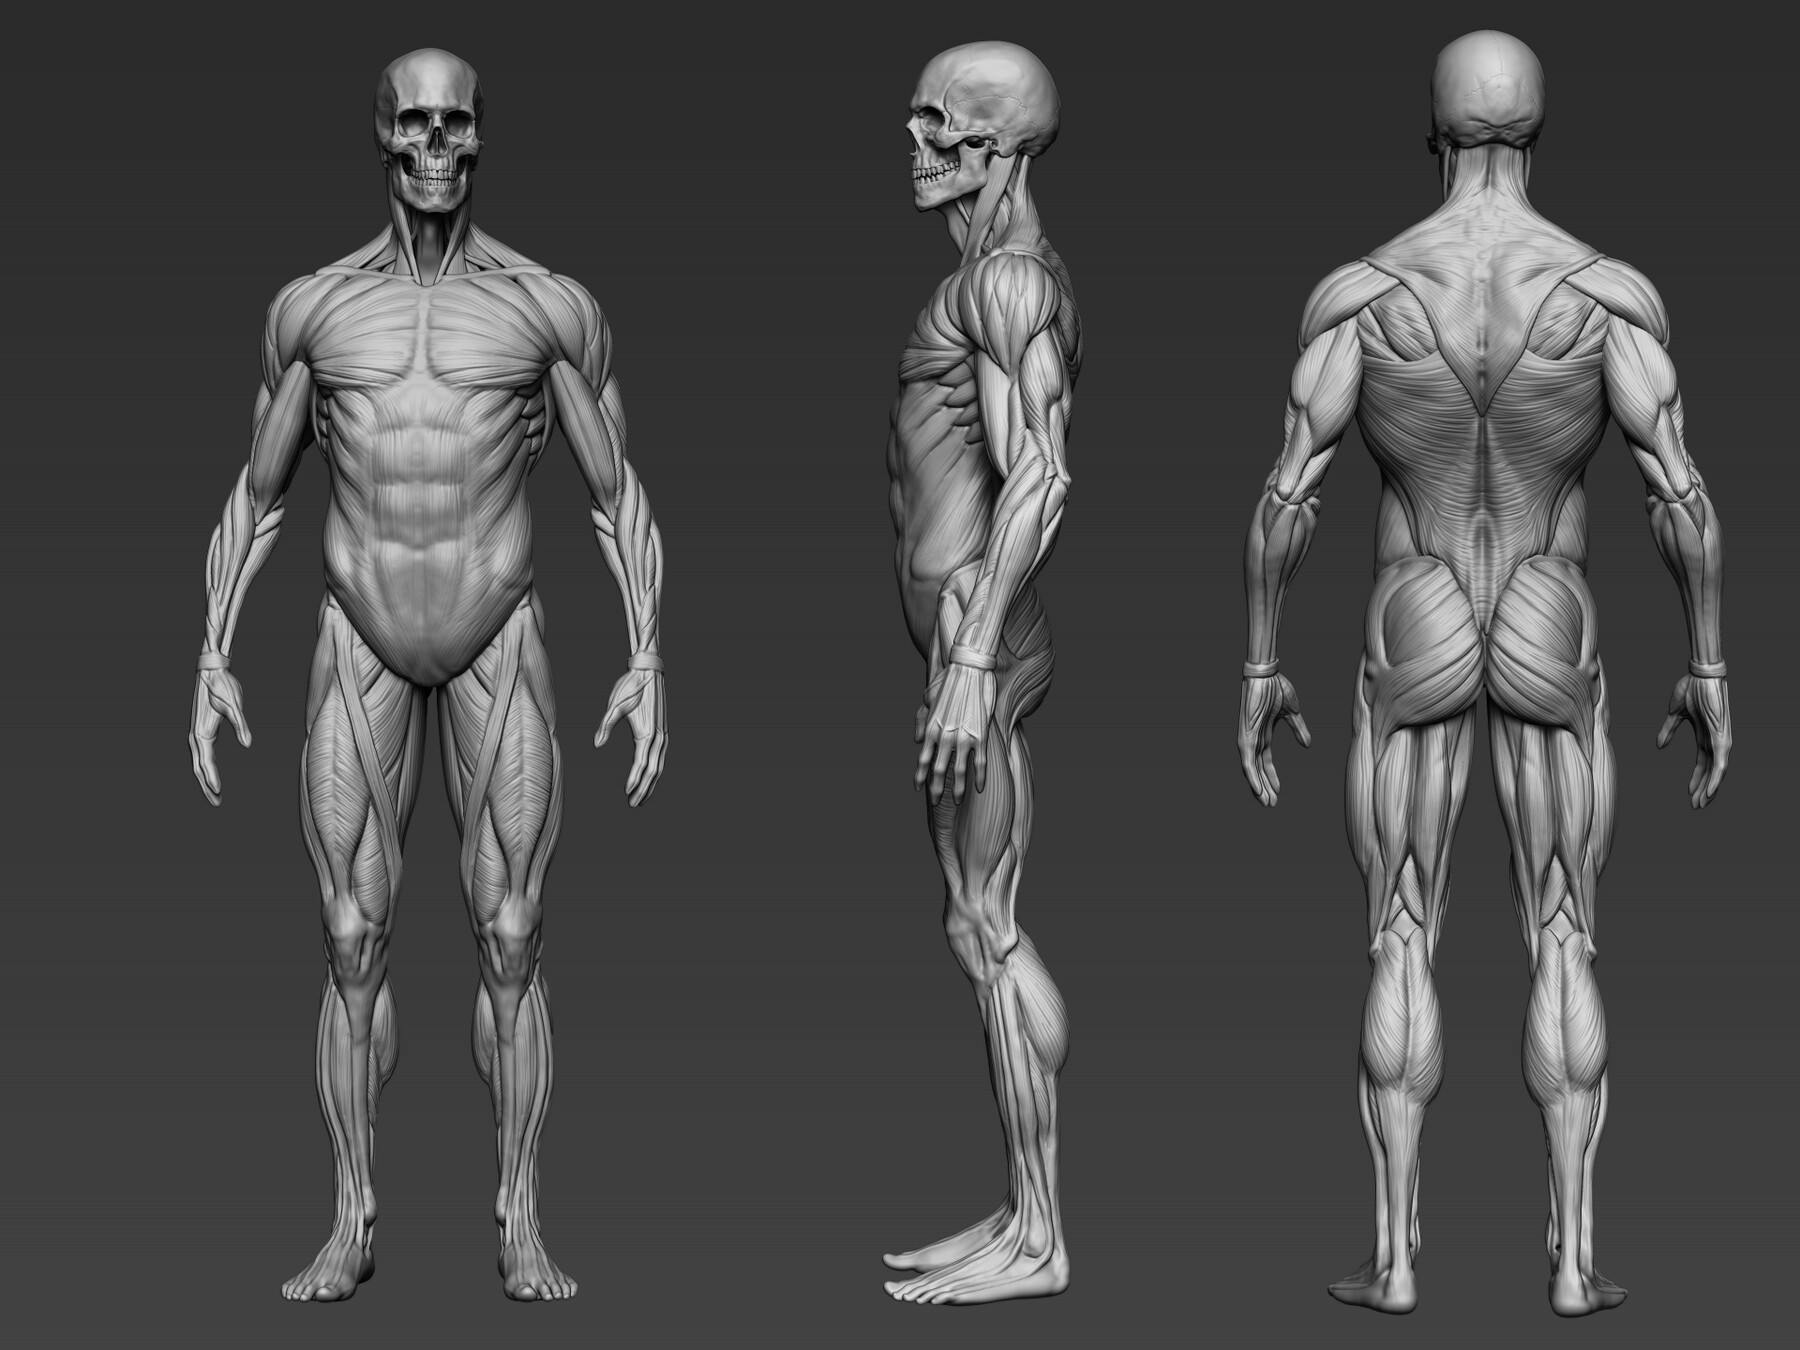 ArtStation - Digital 3D Ecorche - Anatomy reference | Resources